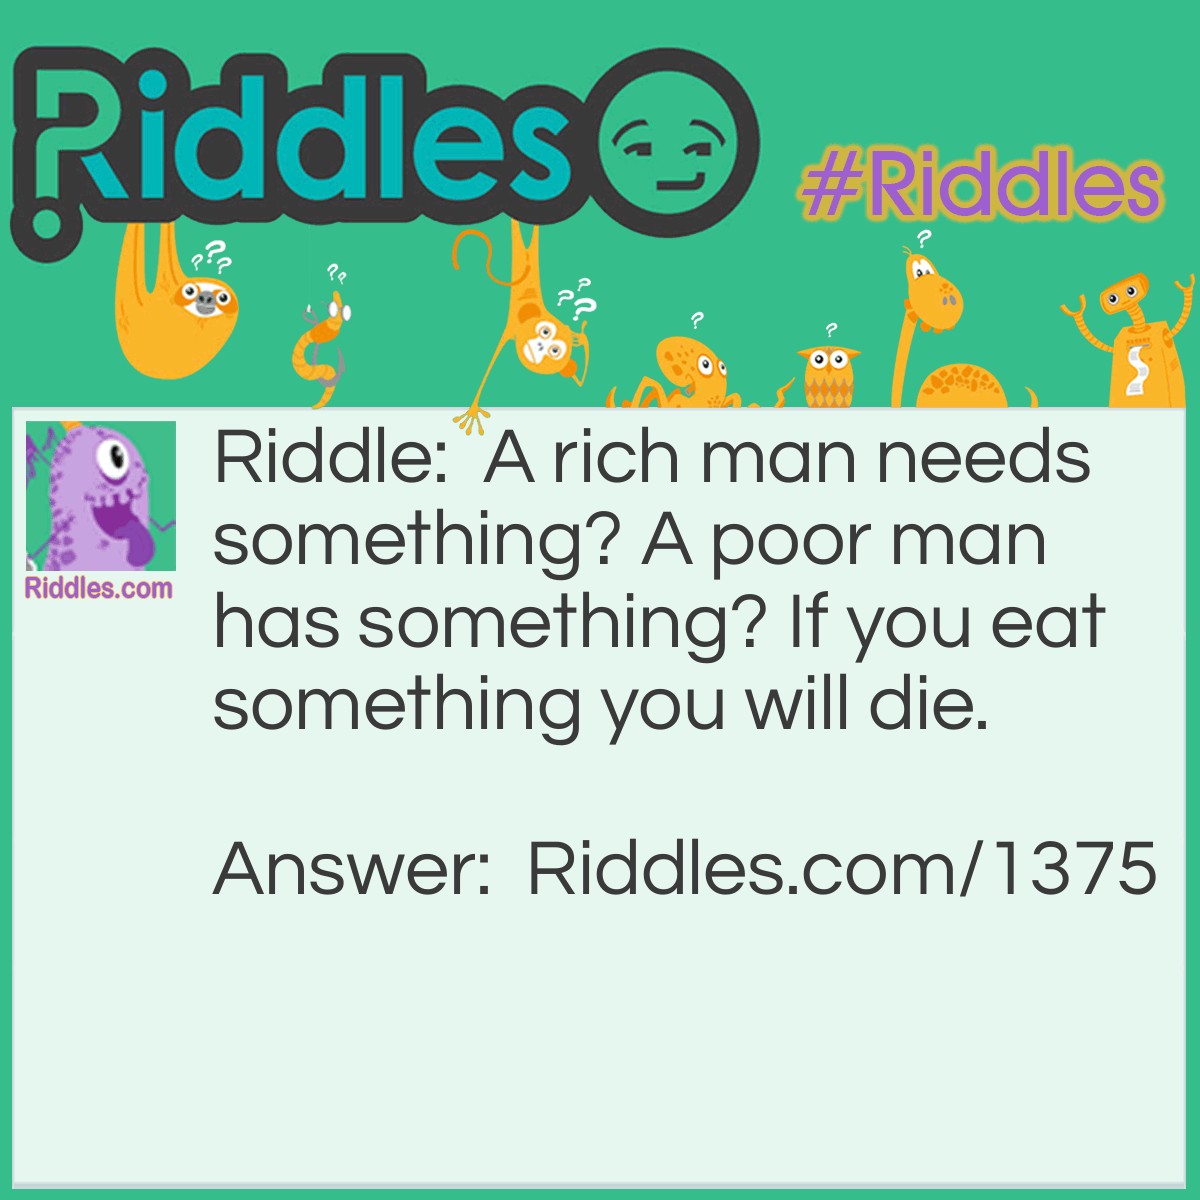 Riddle: A rich man needs something? A poor man has something? If you eat something you will die. Answer: nothing, because a rich man neeeds nothing, a poor man has nothing and if you eat nothing you'll die.